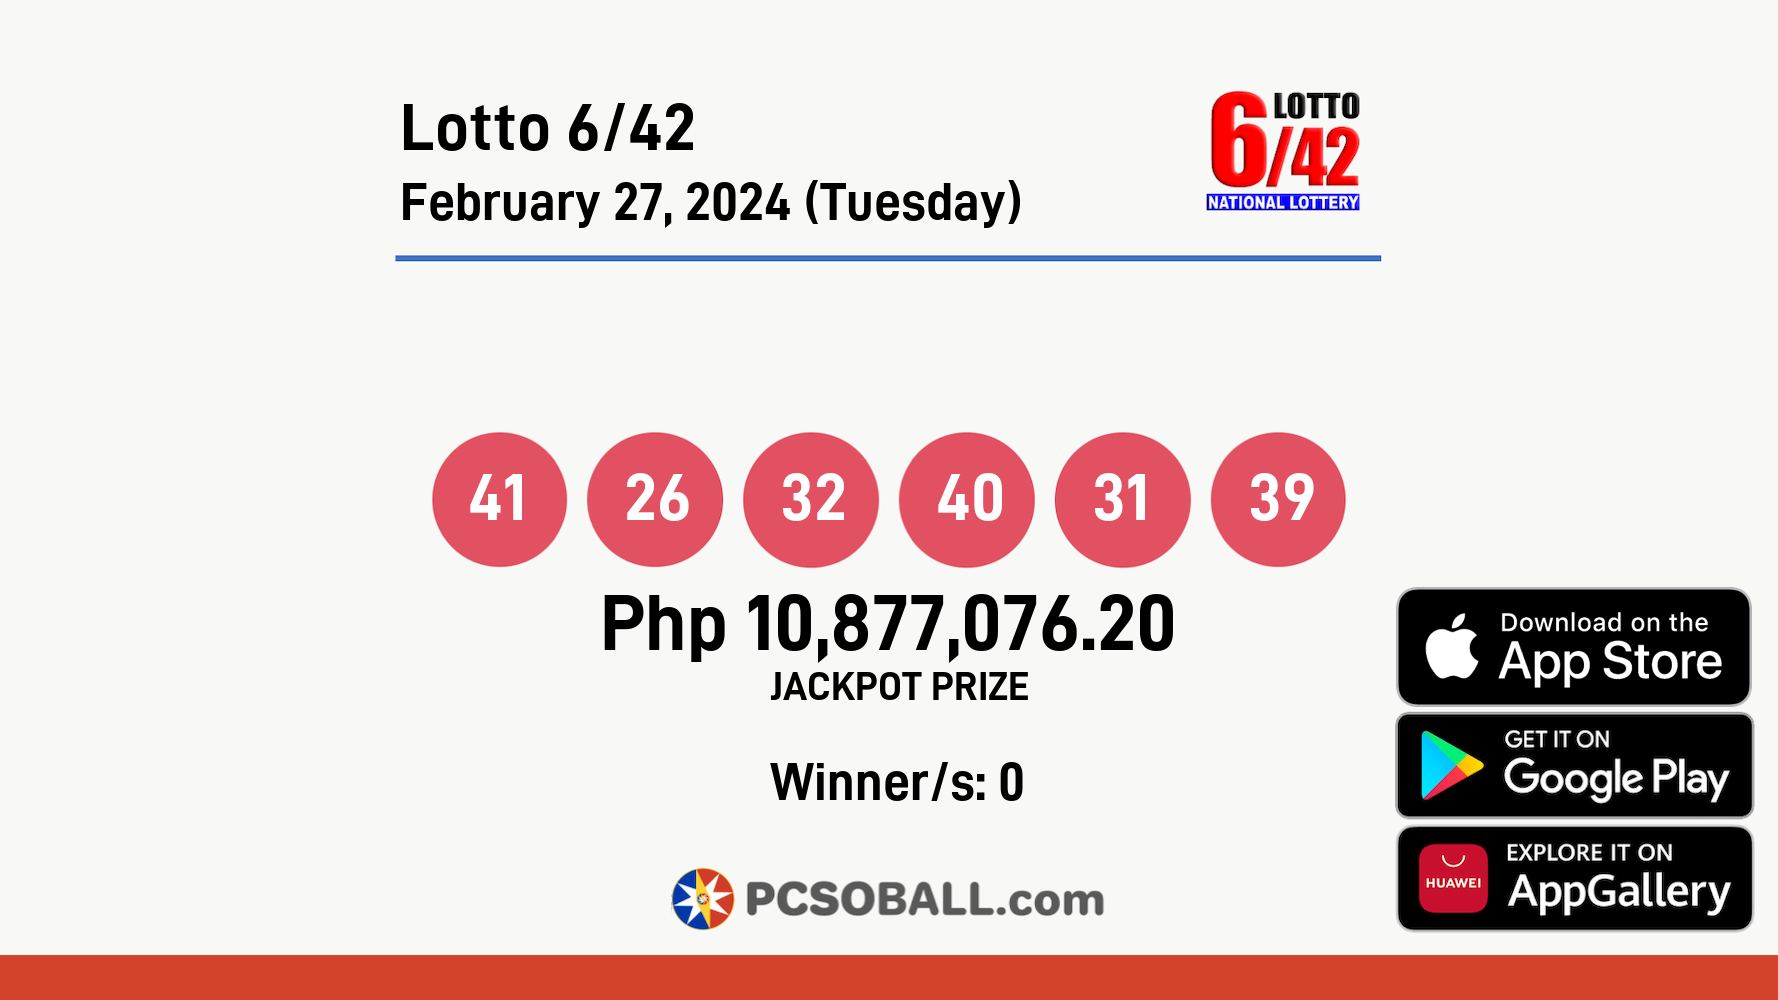 Lotto 6/42 February 27, 2024 (Tuesday) Result